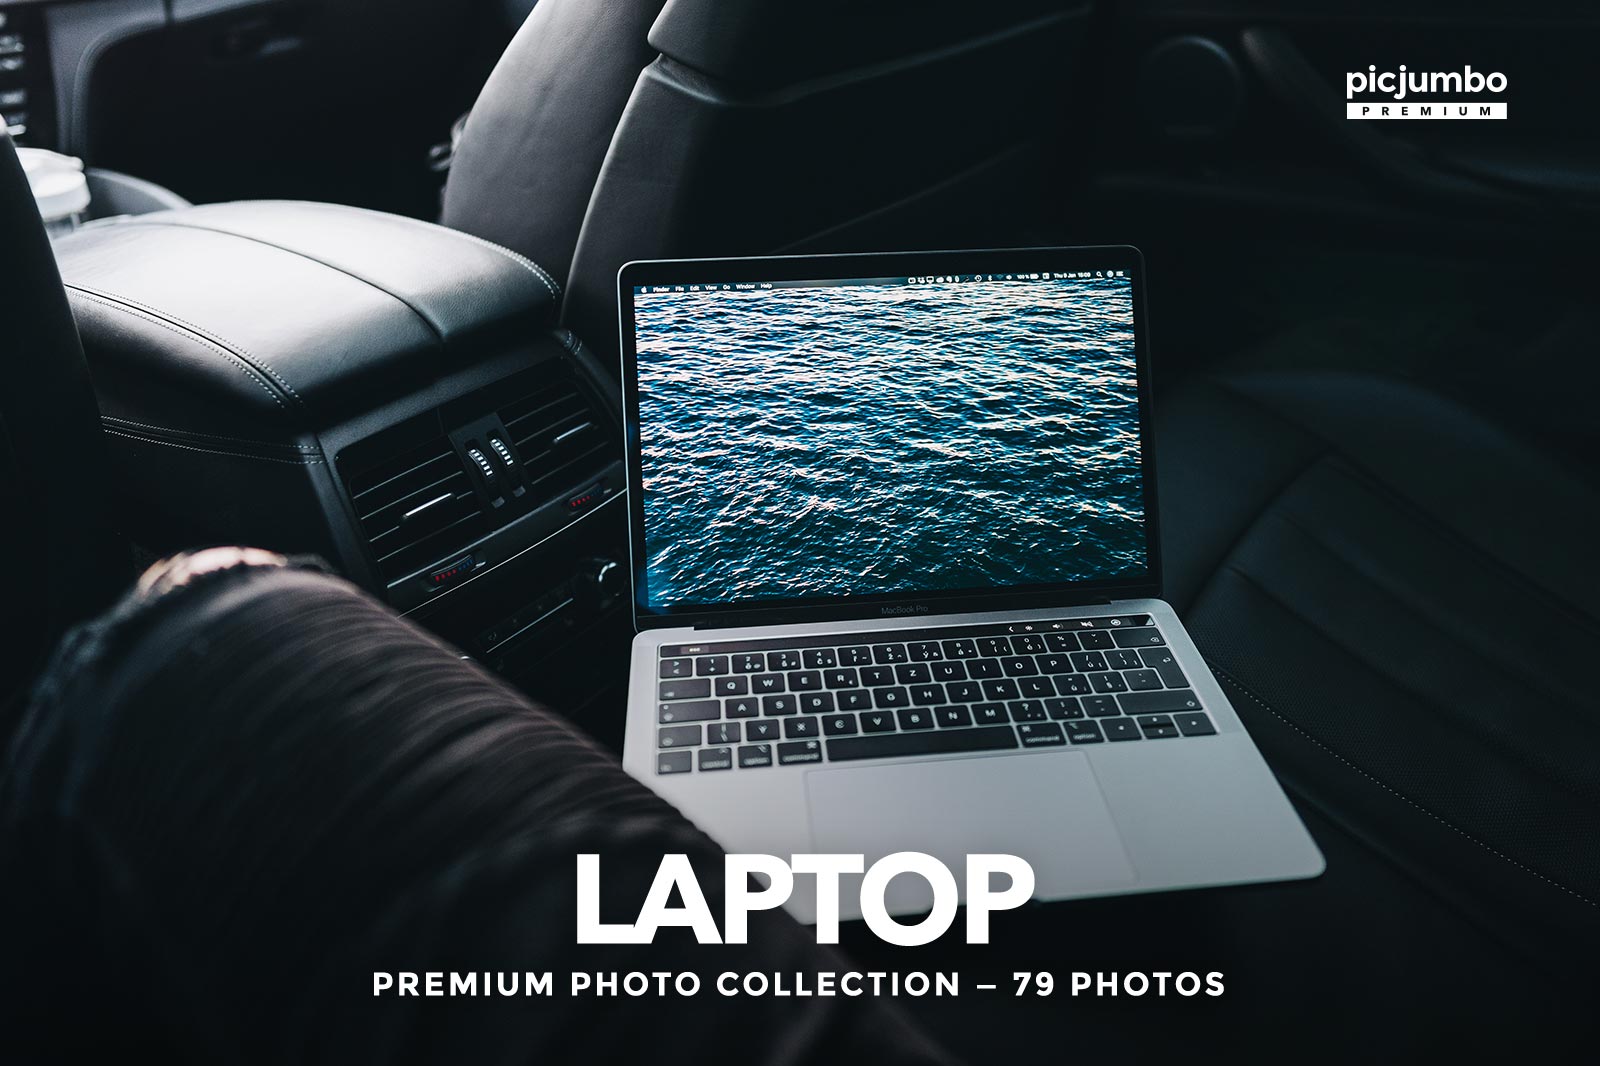 Download hi-res stock photos from our Laptop PREMIUM Collection!